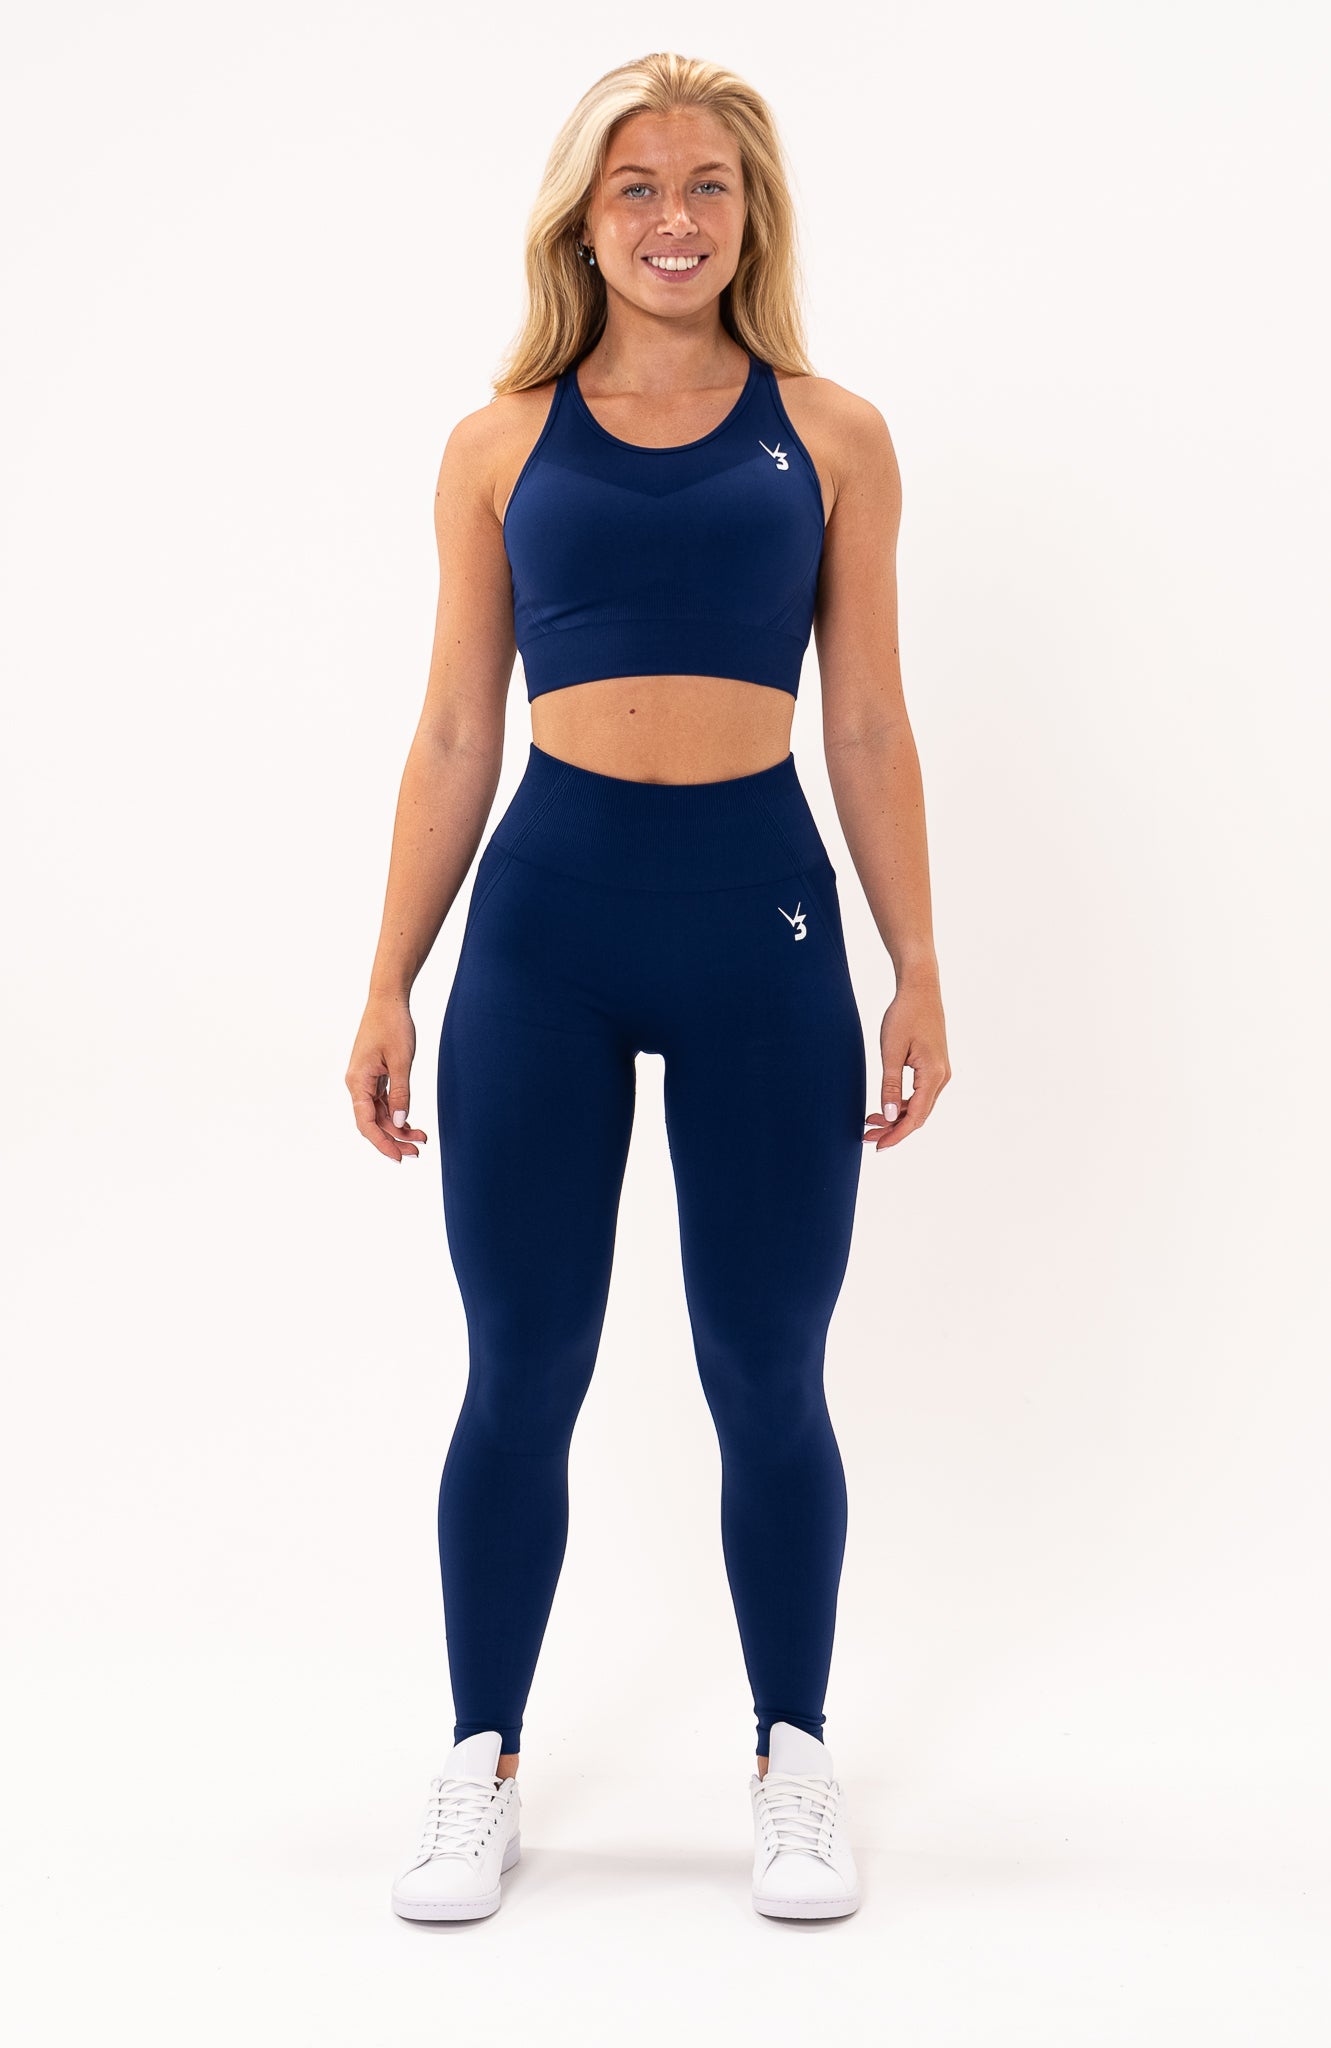 V3 Apparel Women's Tempo seamless scrunch bum shaping high waisted leggings and training sports bra in royal navy blue – Squat proof sports tights and training bra for Gym workouts training, Running, yoga, bodybuilding and bikini fitness.